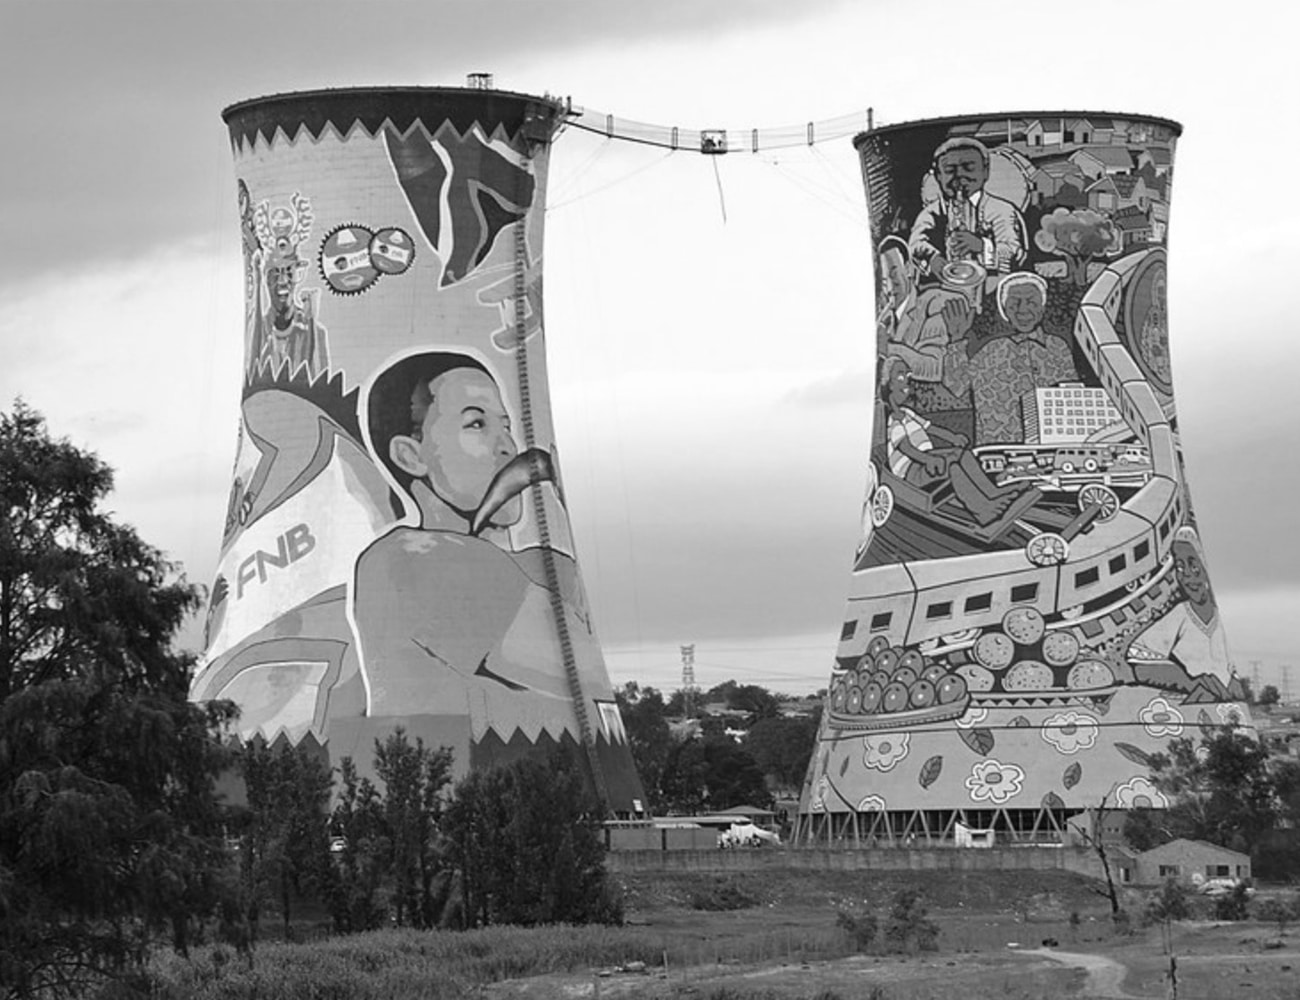 The City of Soweto in South Africa